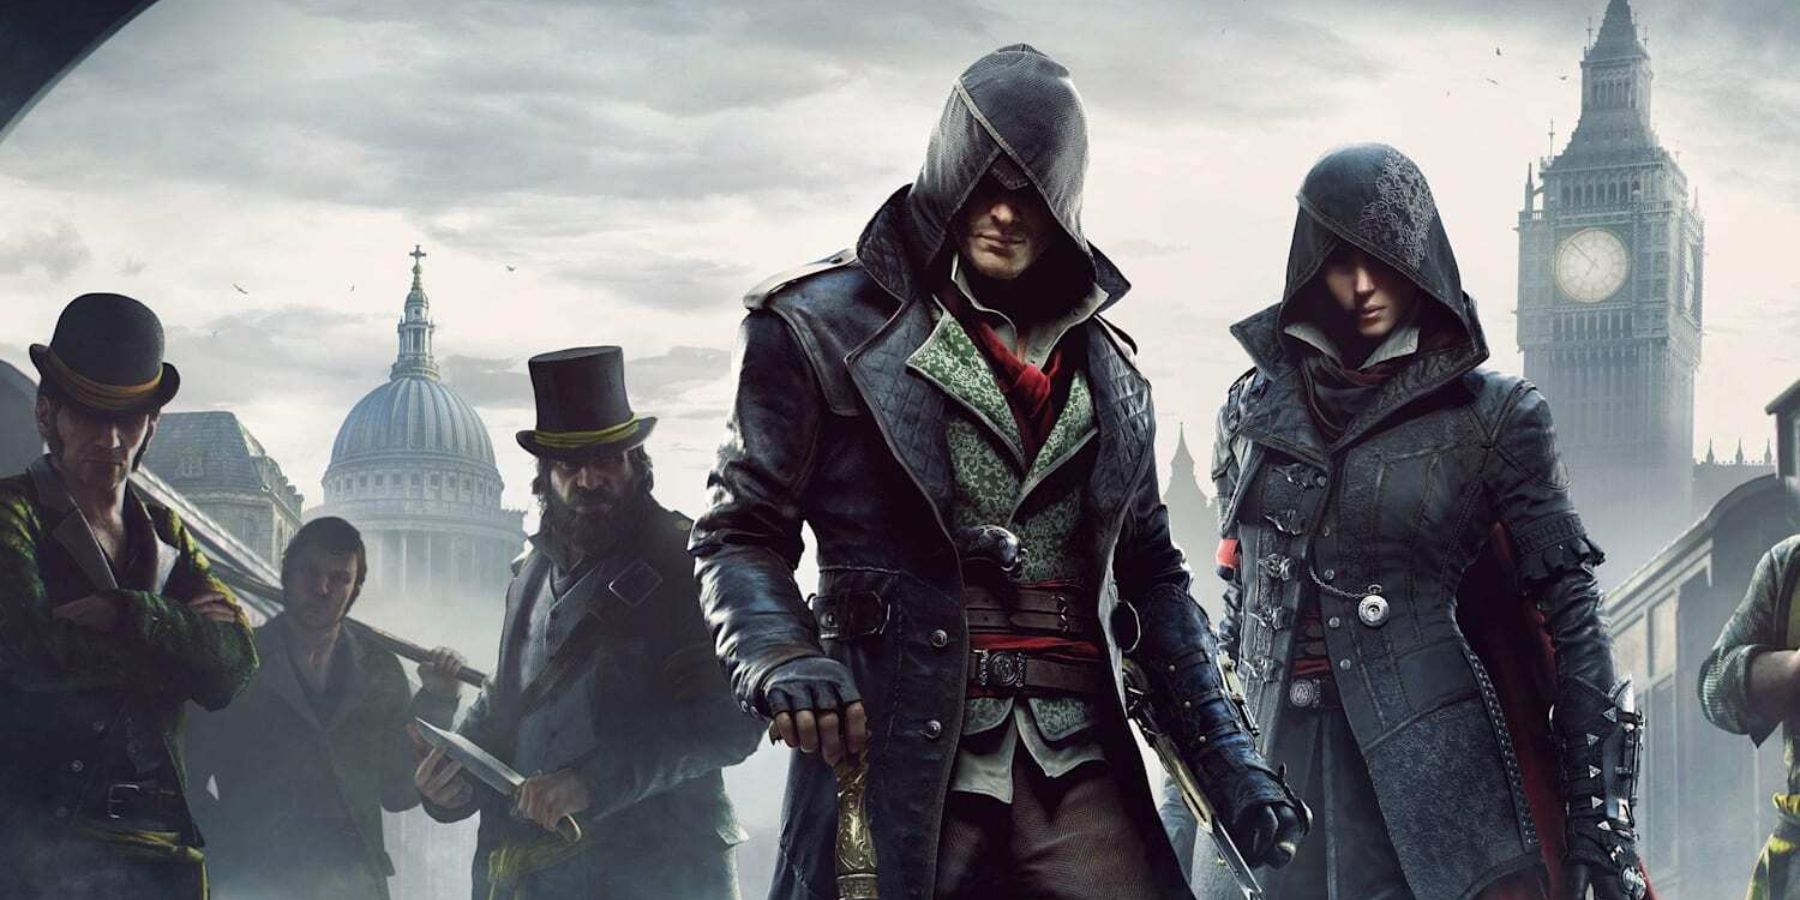 Jacob and Evie pose with London in the background in Assassin's Creed: Syndicate